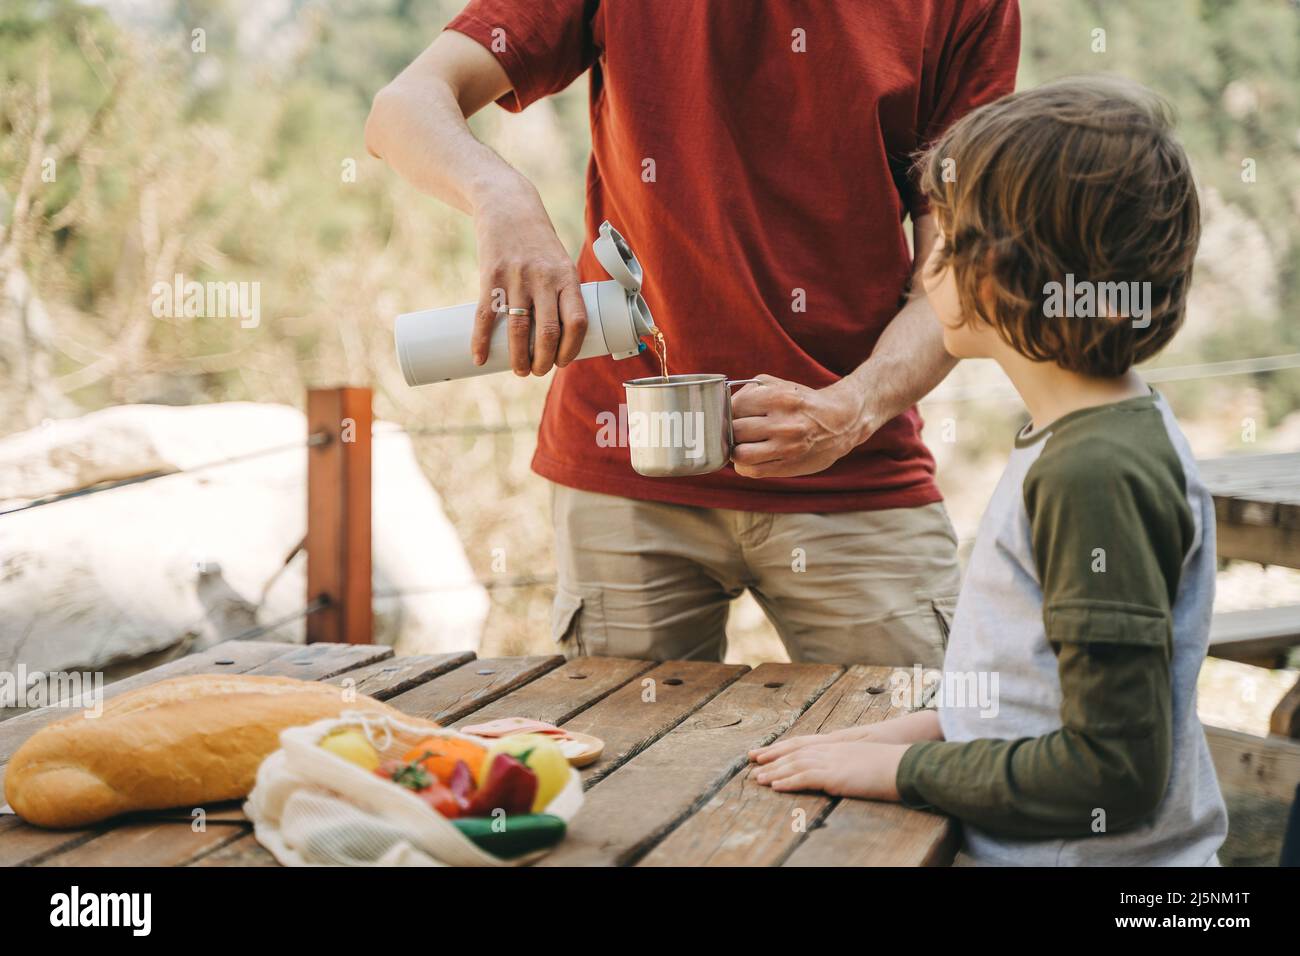 https://c8.alamy.com/comp/2J5NM1T/father-dad-pours-hot-coffee-tea-from-thermos-into-the-mug-on-a-family-picnic-in-the-mountains-child-school-boy-kid-is-watching-his-dad-filling-the-2J5NM1T.jpg